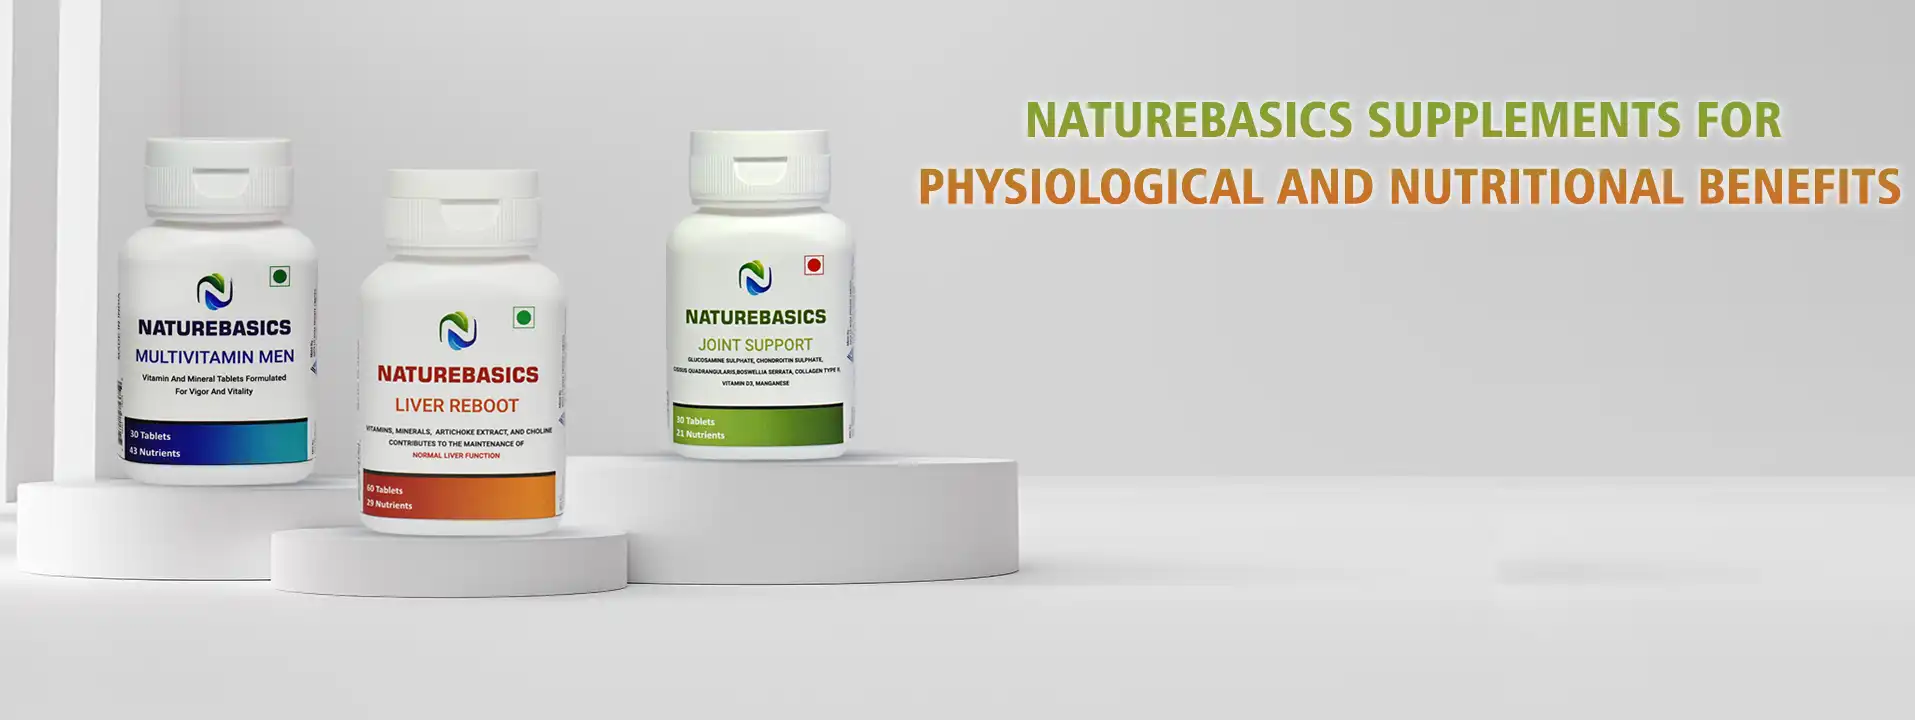 bottle of supplement for physiological and nutritional benefits